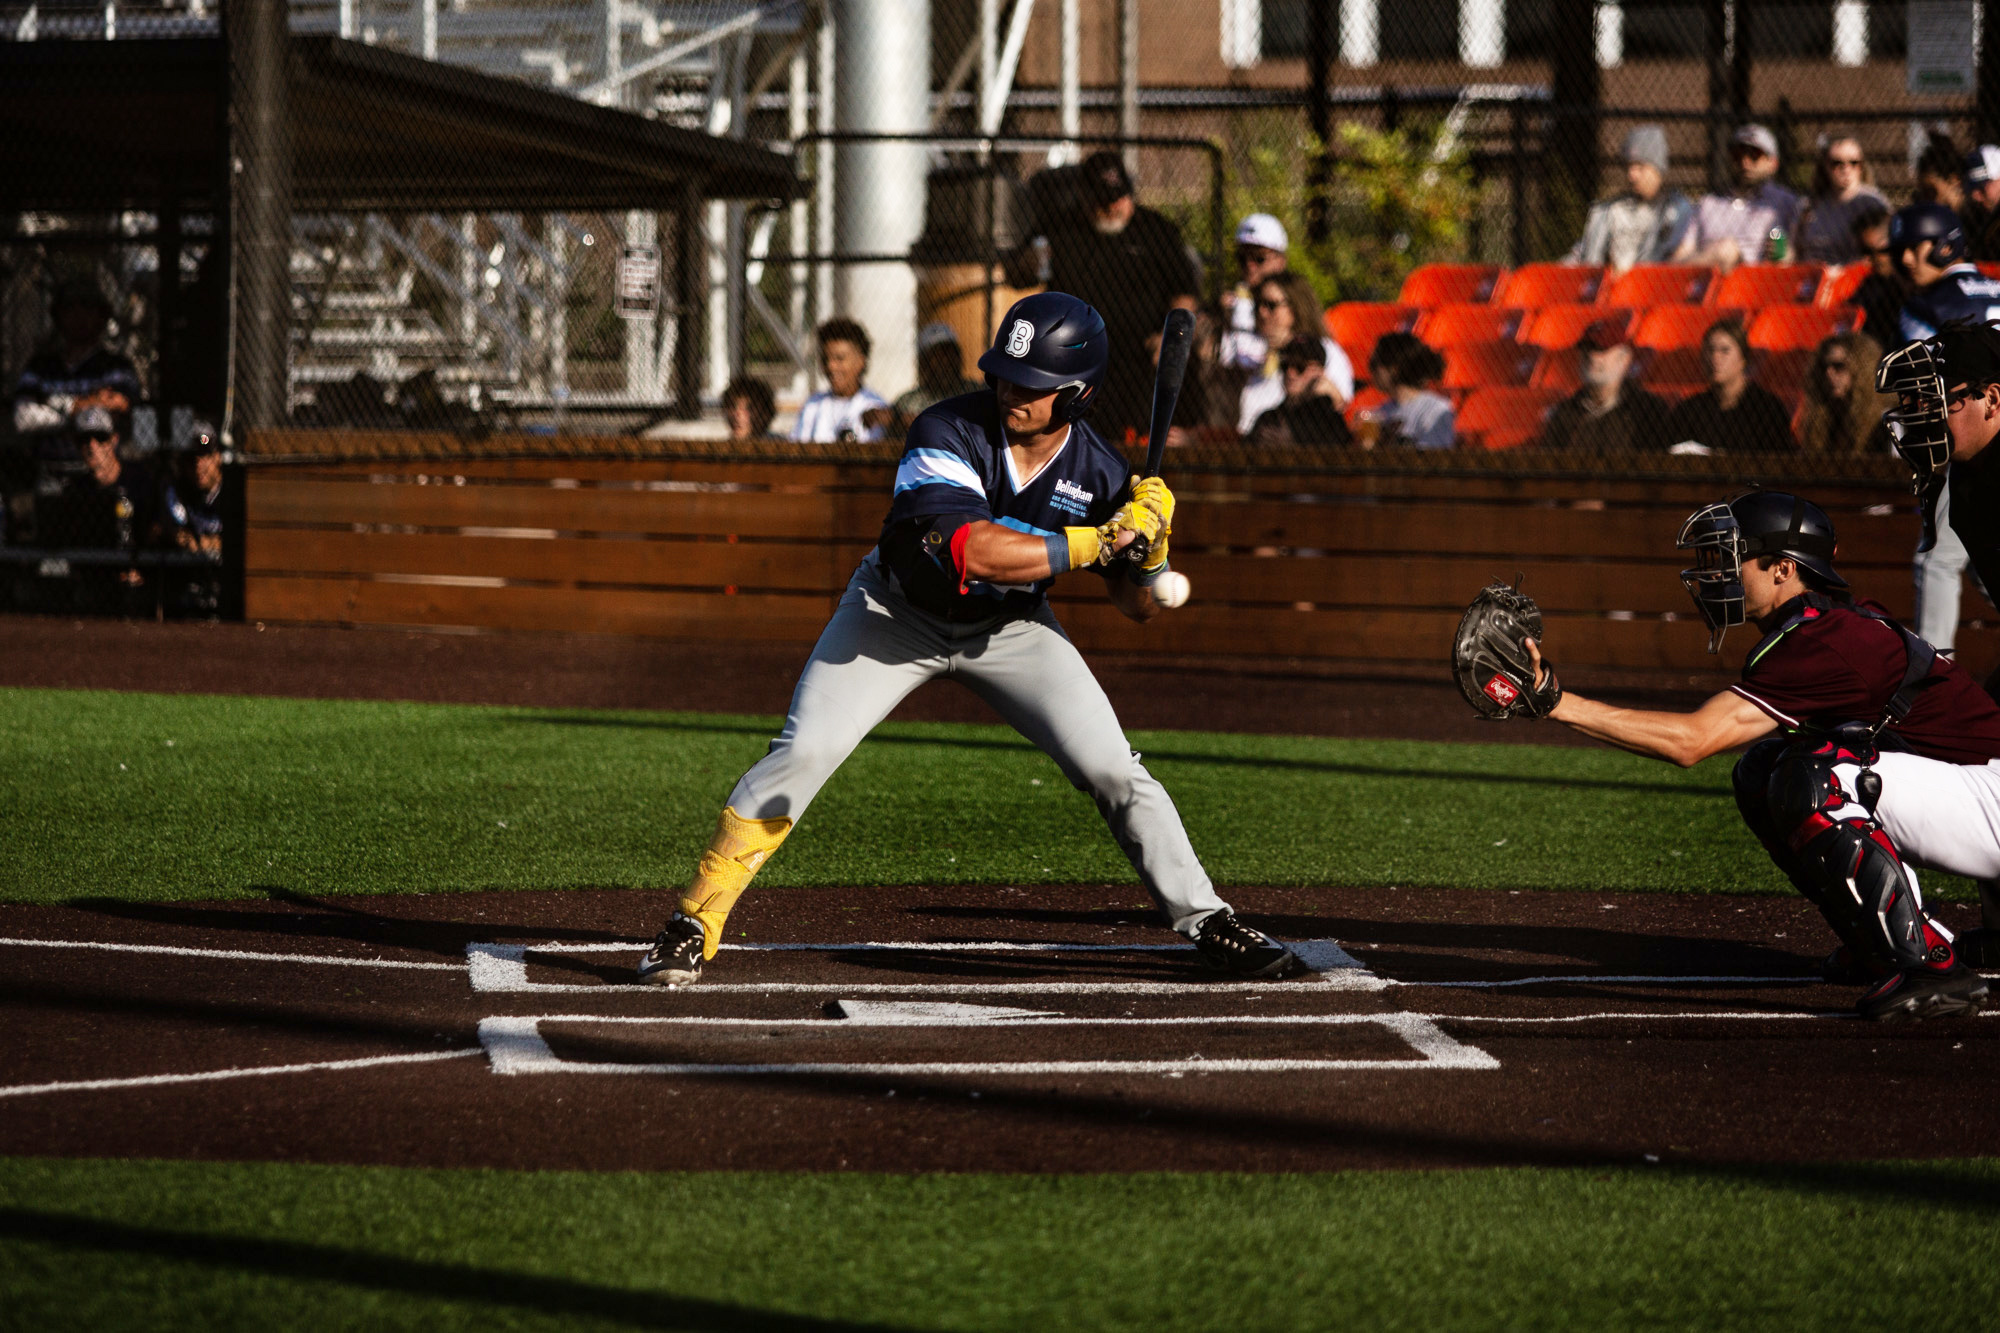 Brady Reynolds of The Bellingham Bells at bat against The Ridgefield Raptors on Friday July 7th, 2023 at the Ridgefield Outdoor Recreation Complex.